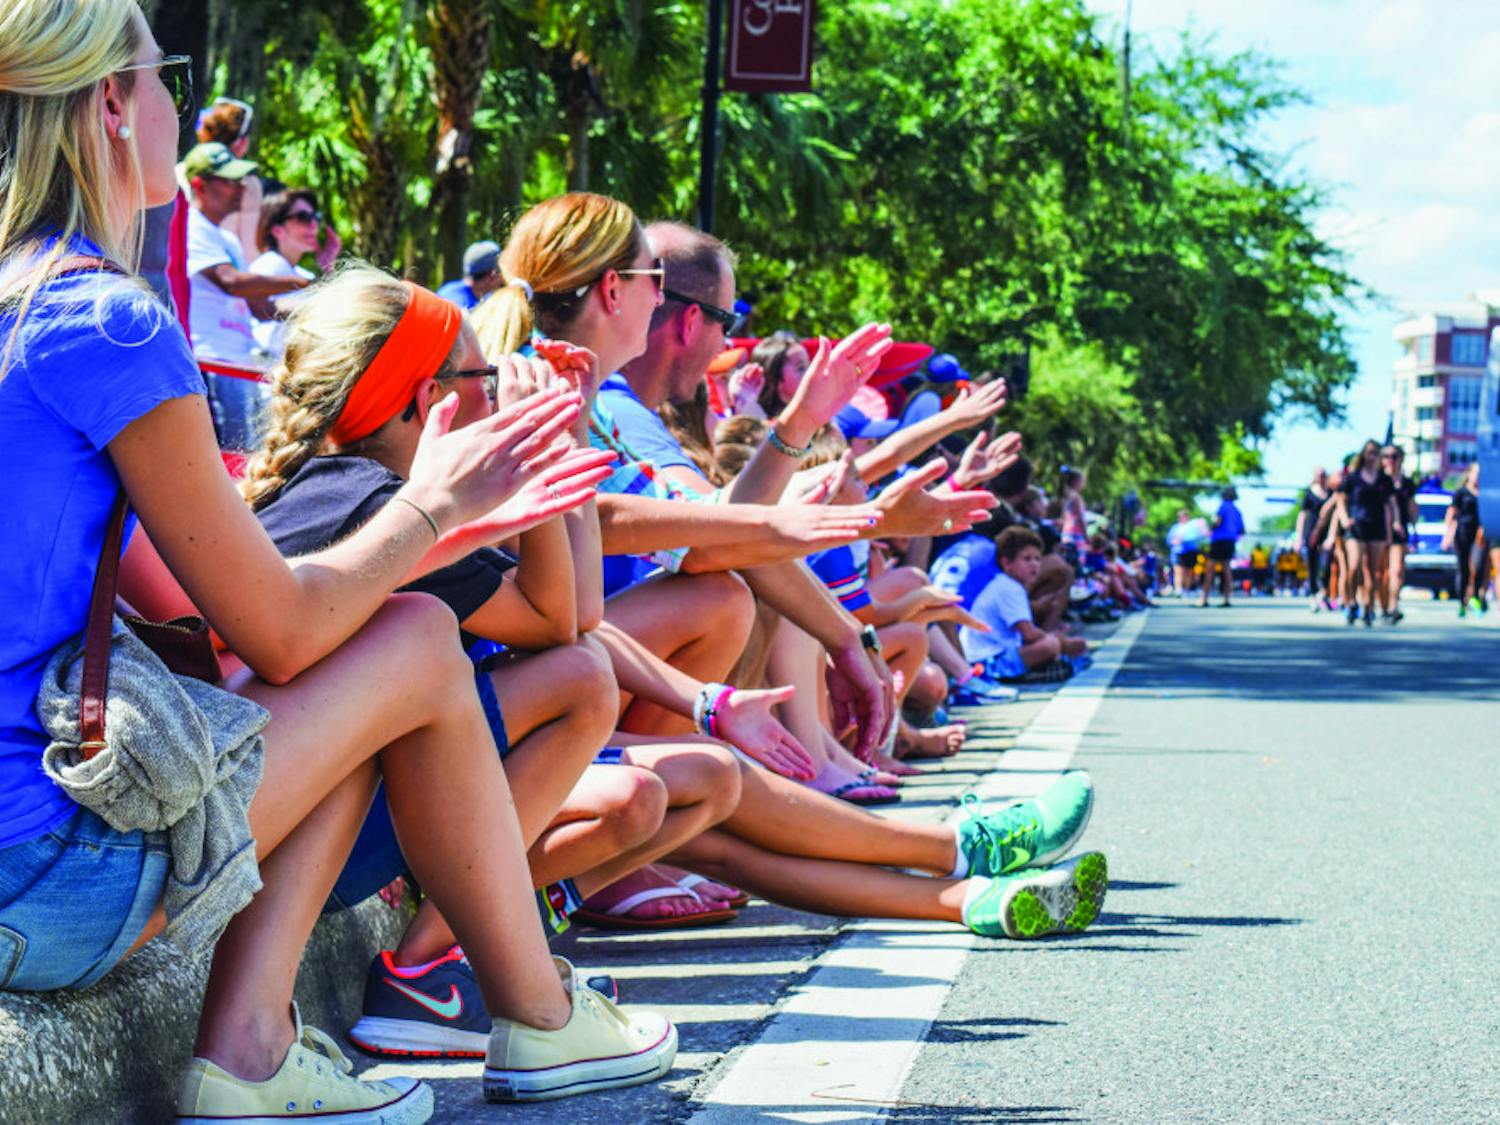 The crowd Gator Chomps in spirit of this year’s UF Homecoming Parade on Friday on West University Avenue.